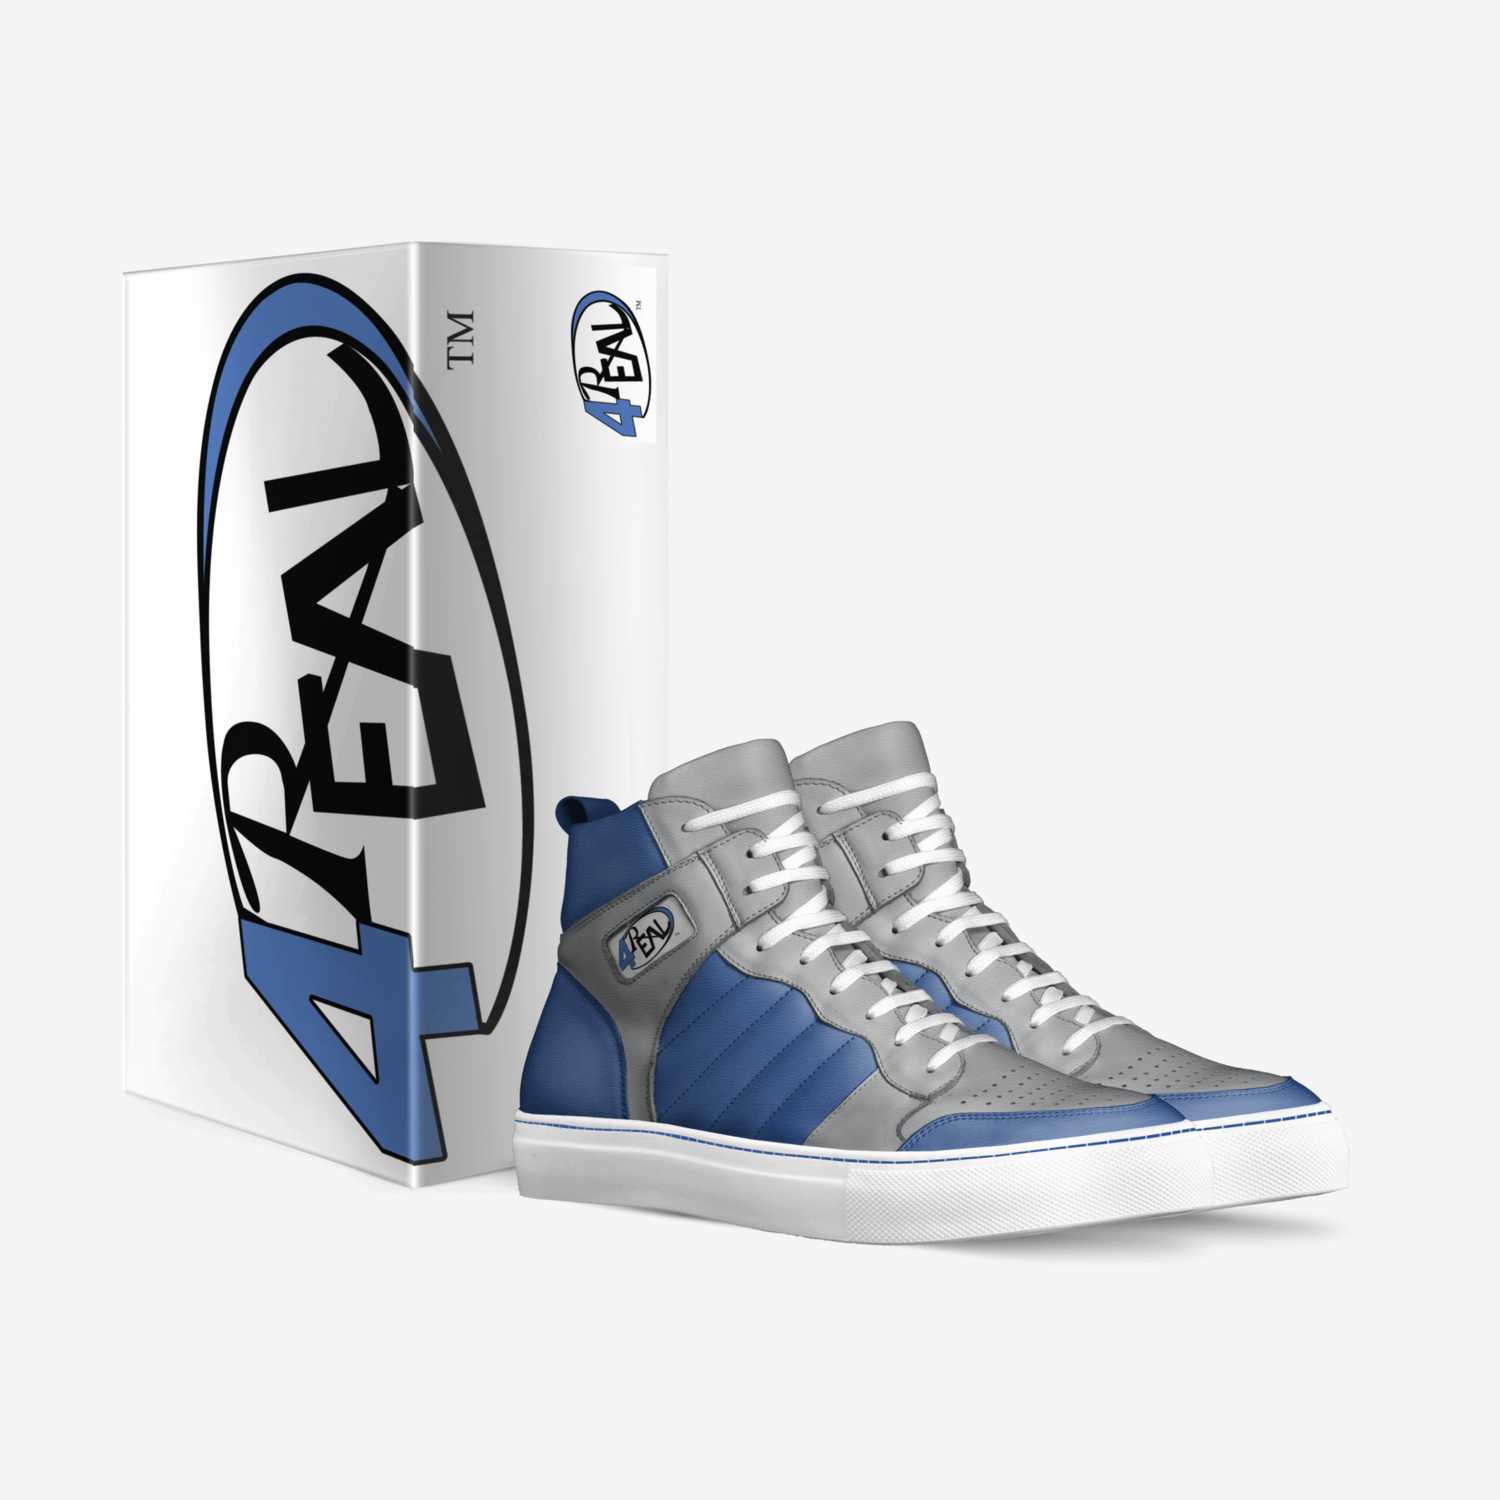 4Real Star Edition custom made in Italy shoes by Mr. 4real | Box view